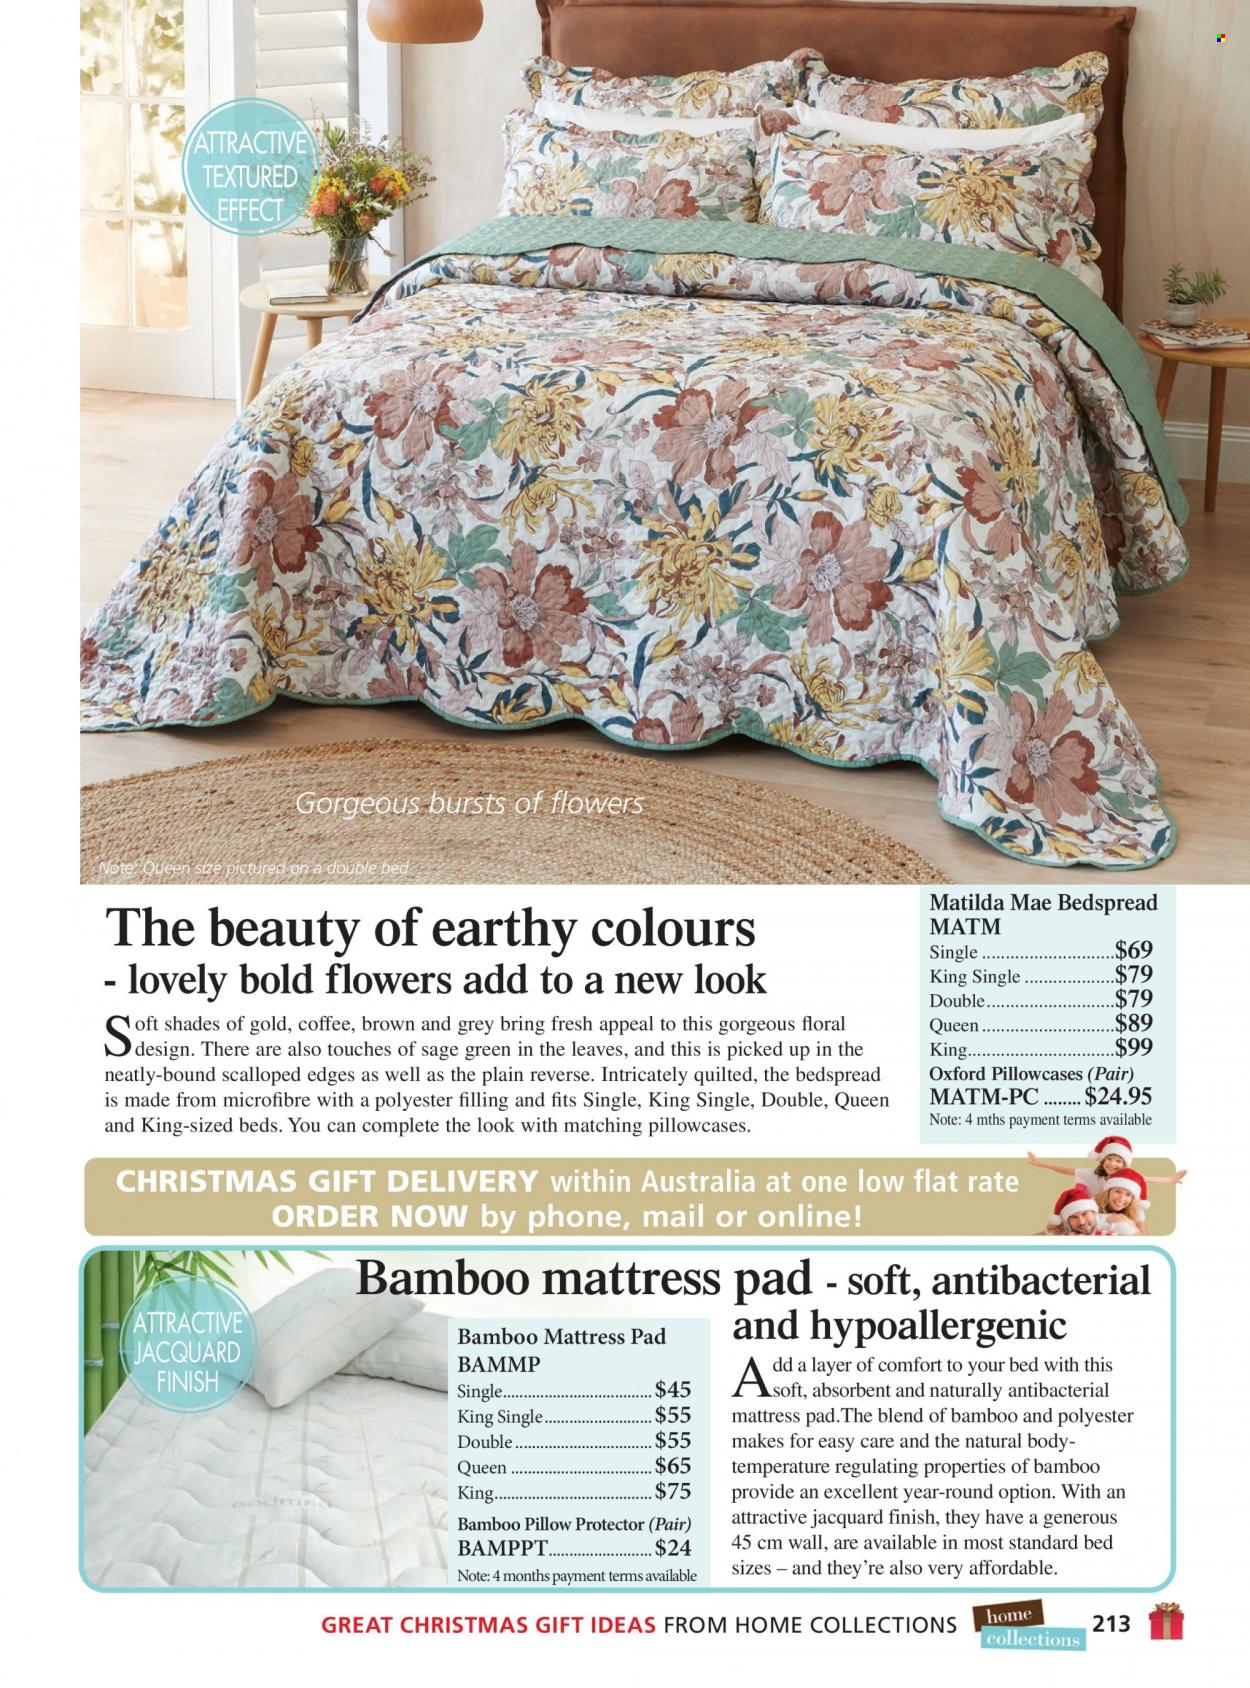 thumbnail - Innovations Catalogue - Sales products - bedspread, pillow, pillowcase, mattress protector. Page 213.